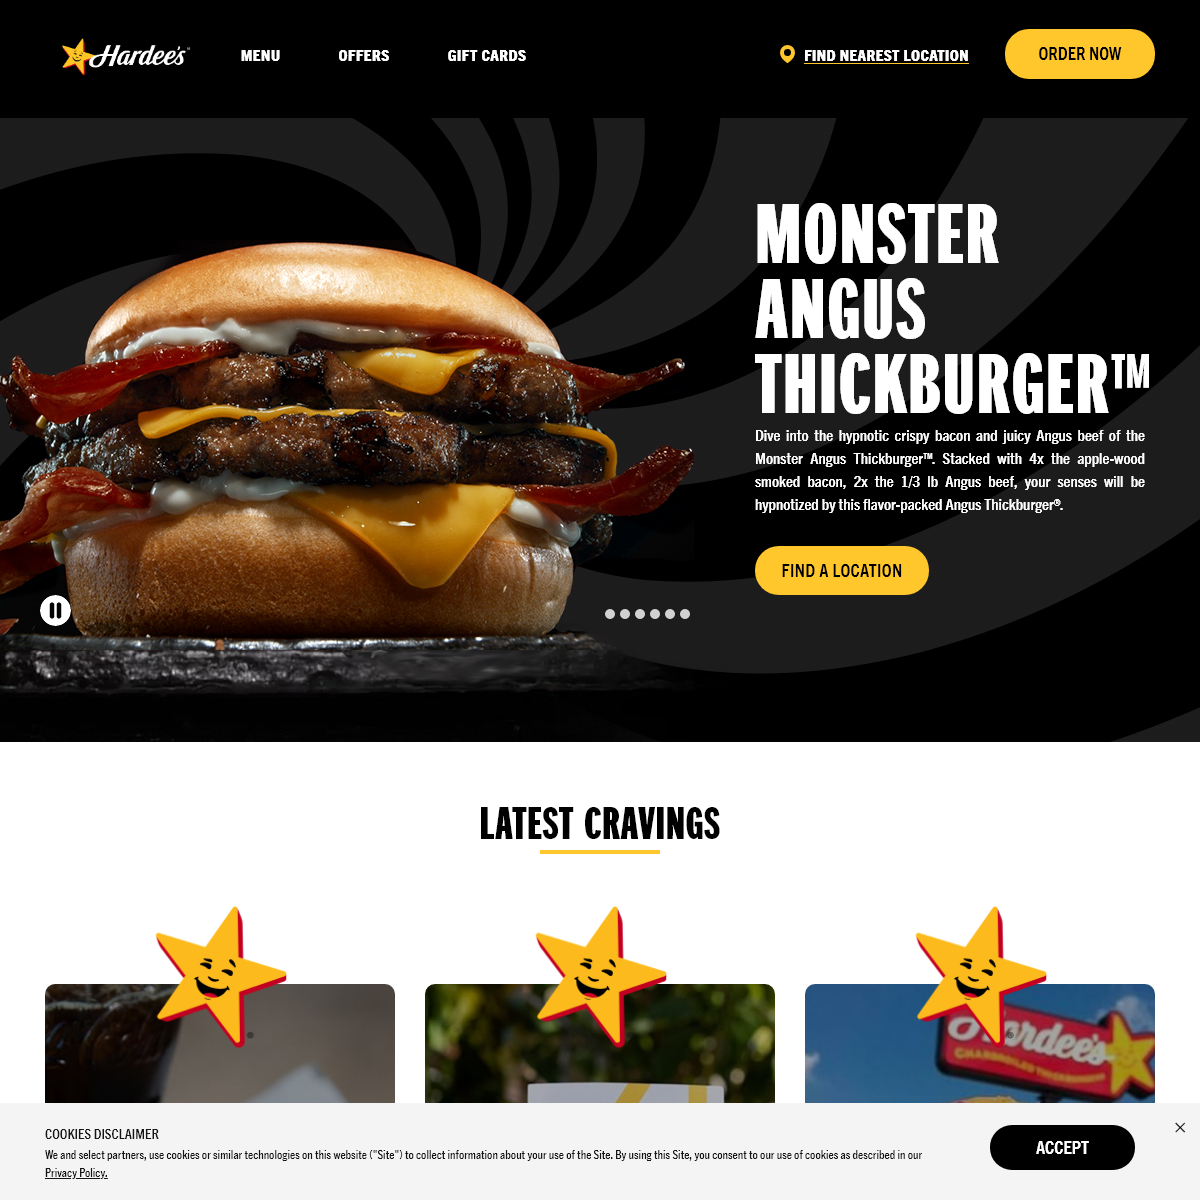 A complete backup of hardees.com